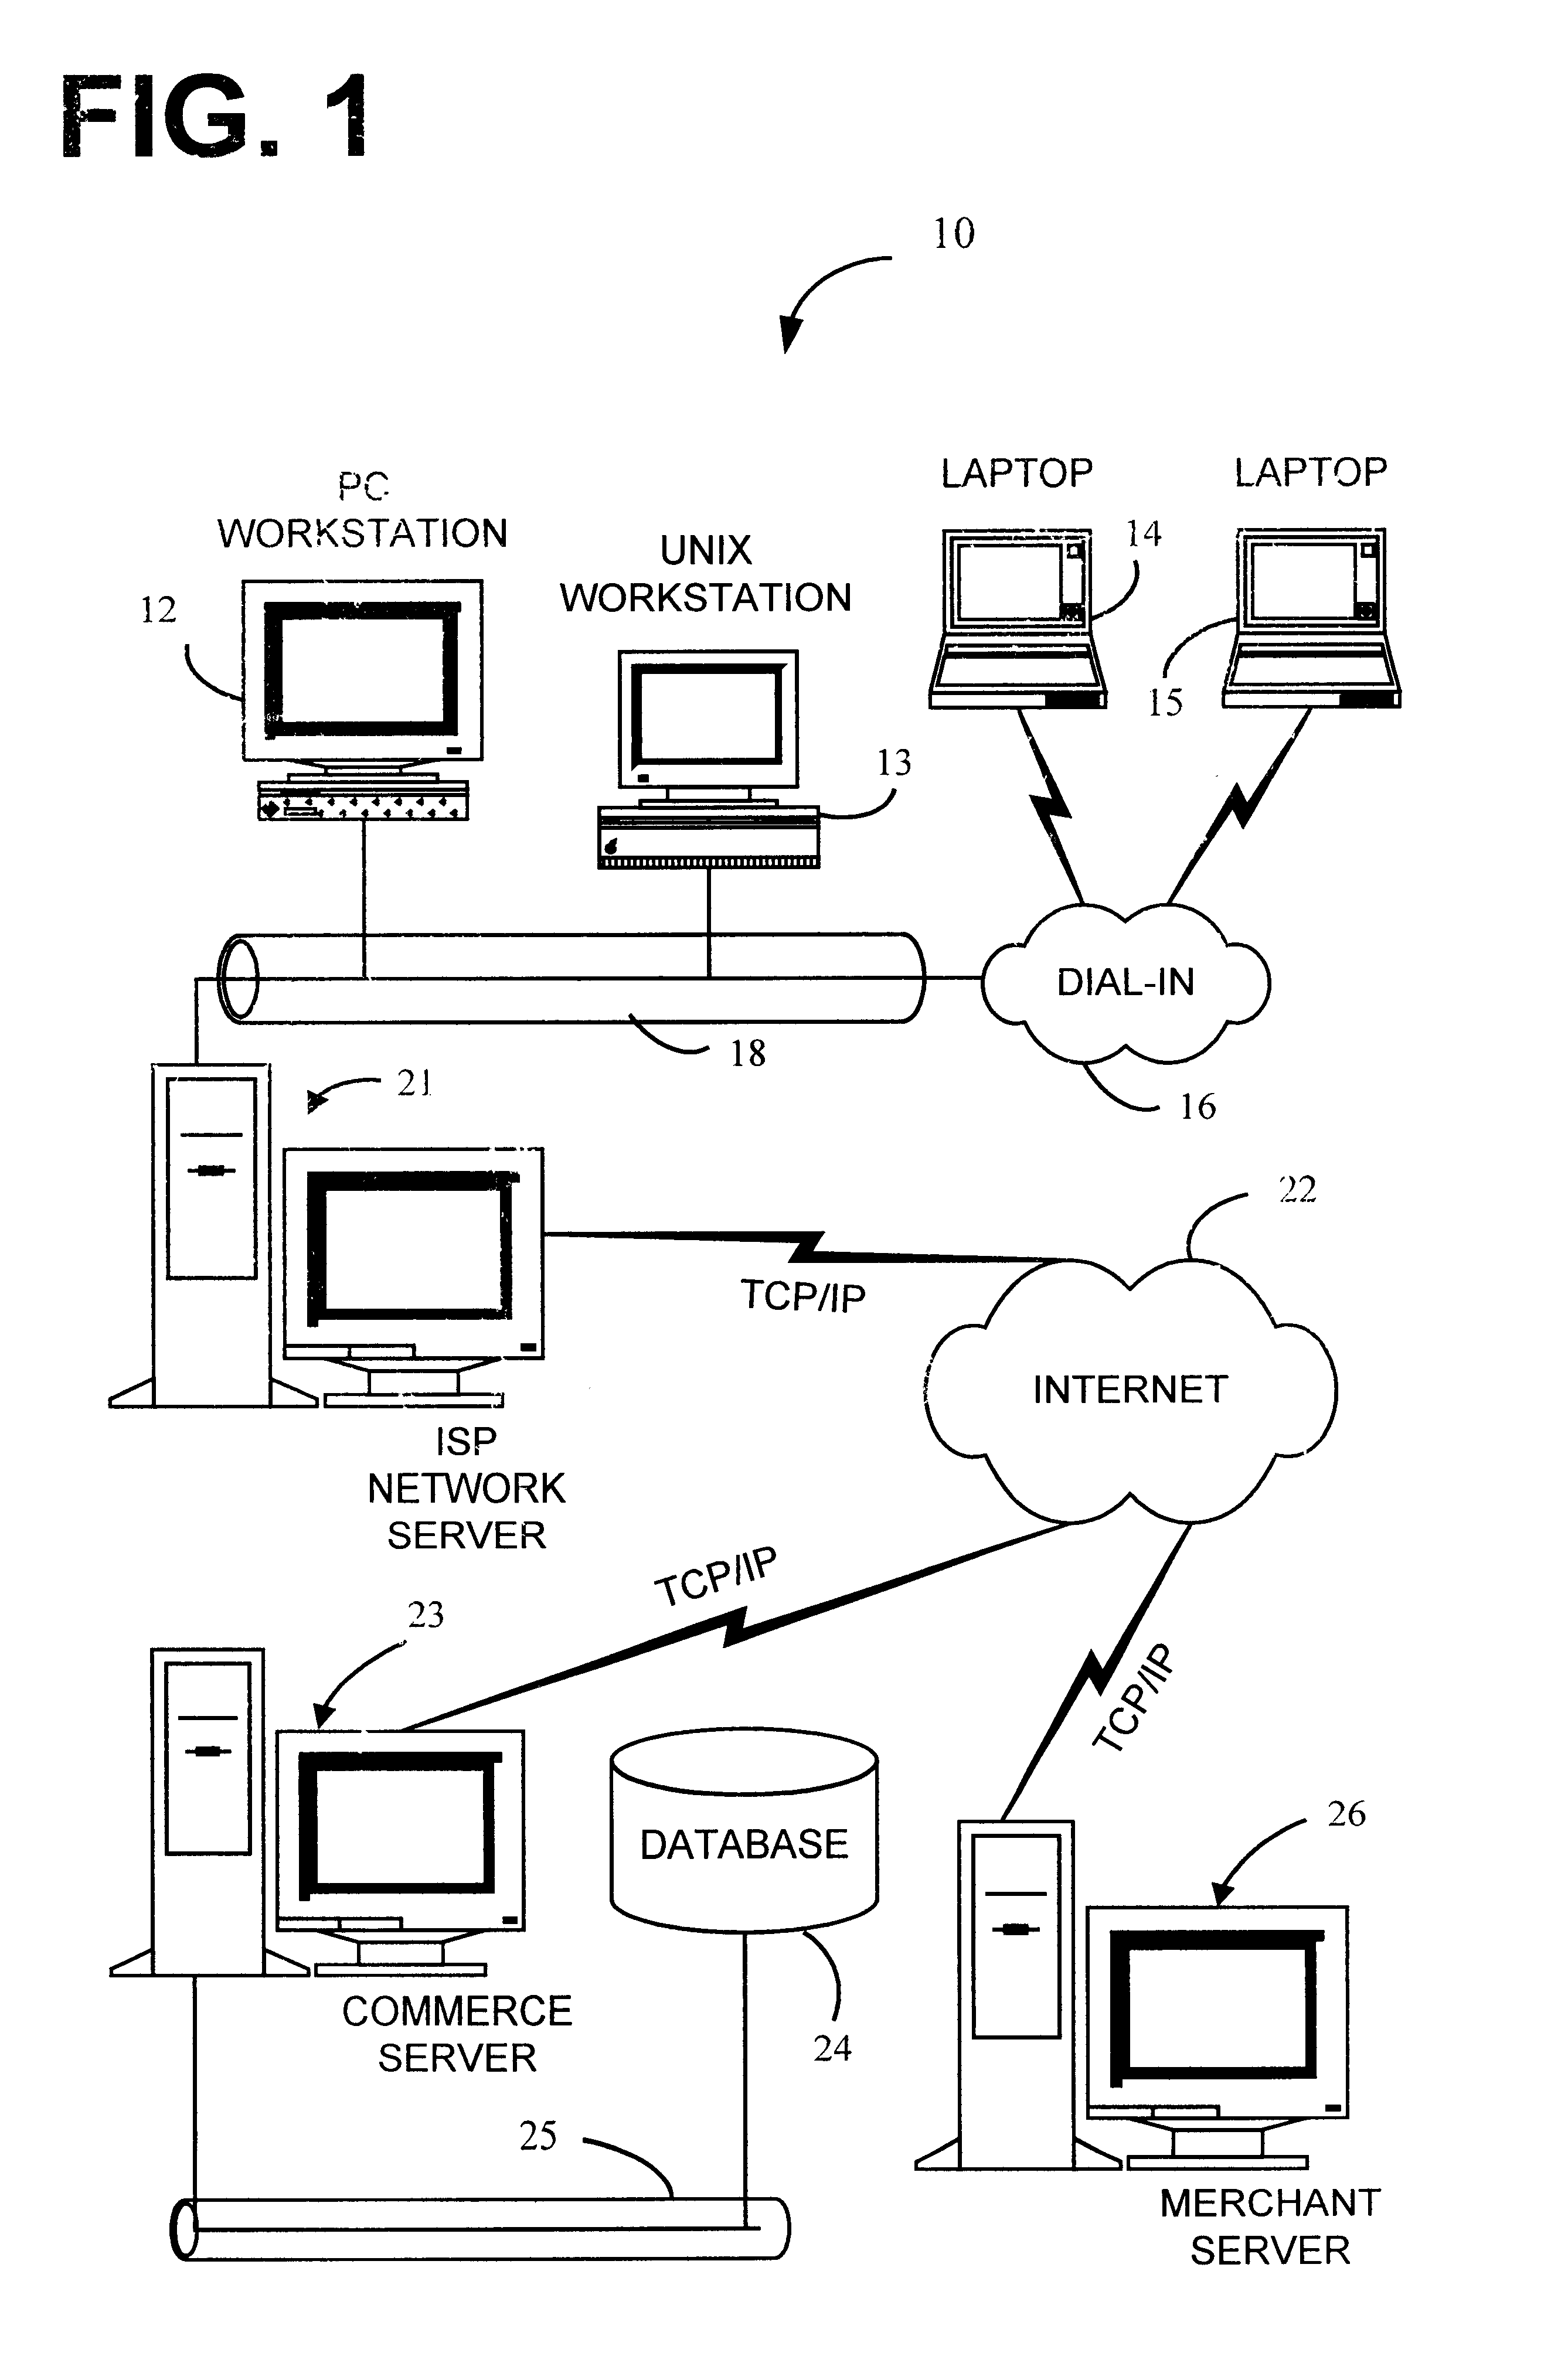 System and method for creating and sharing purchasing lists on a network